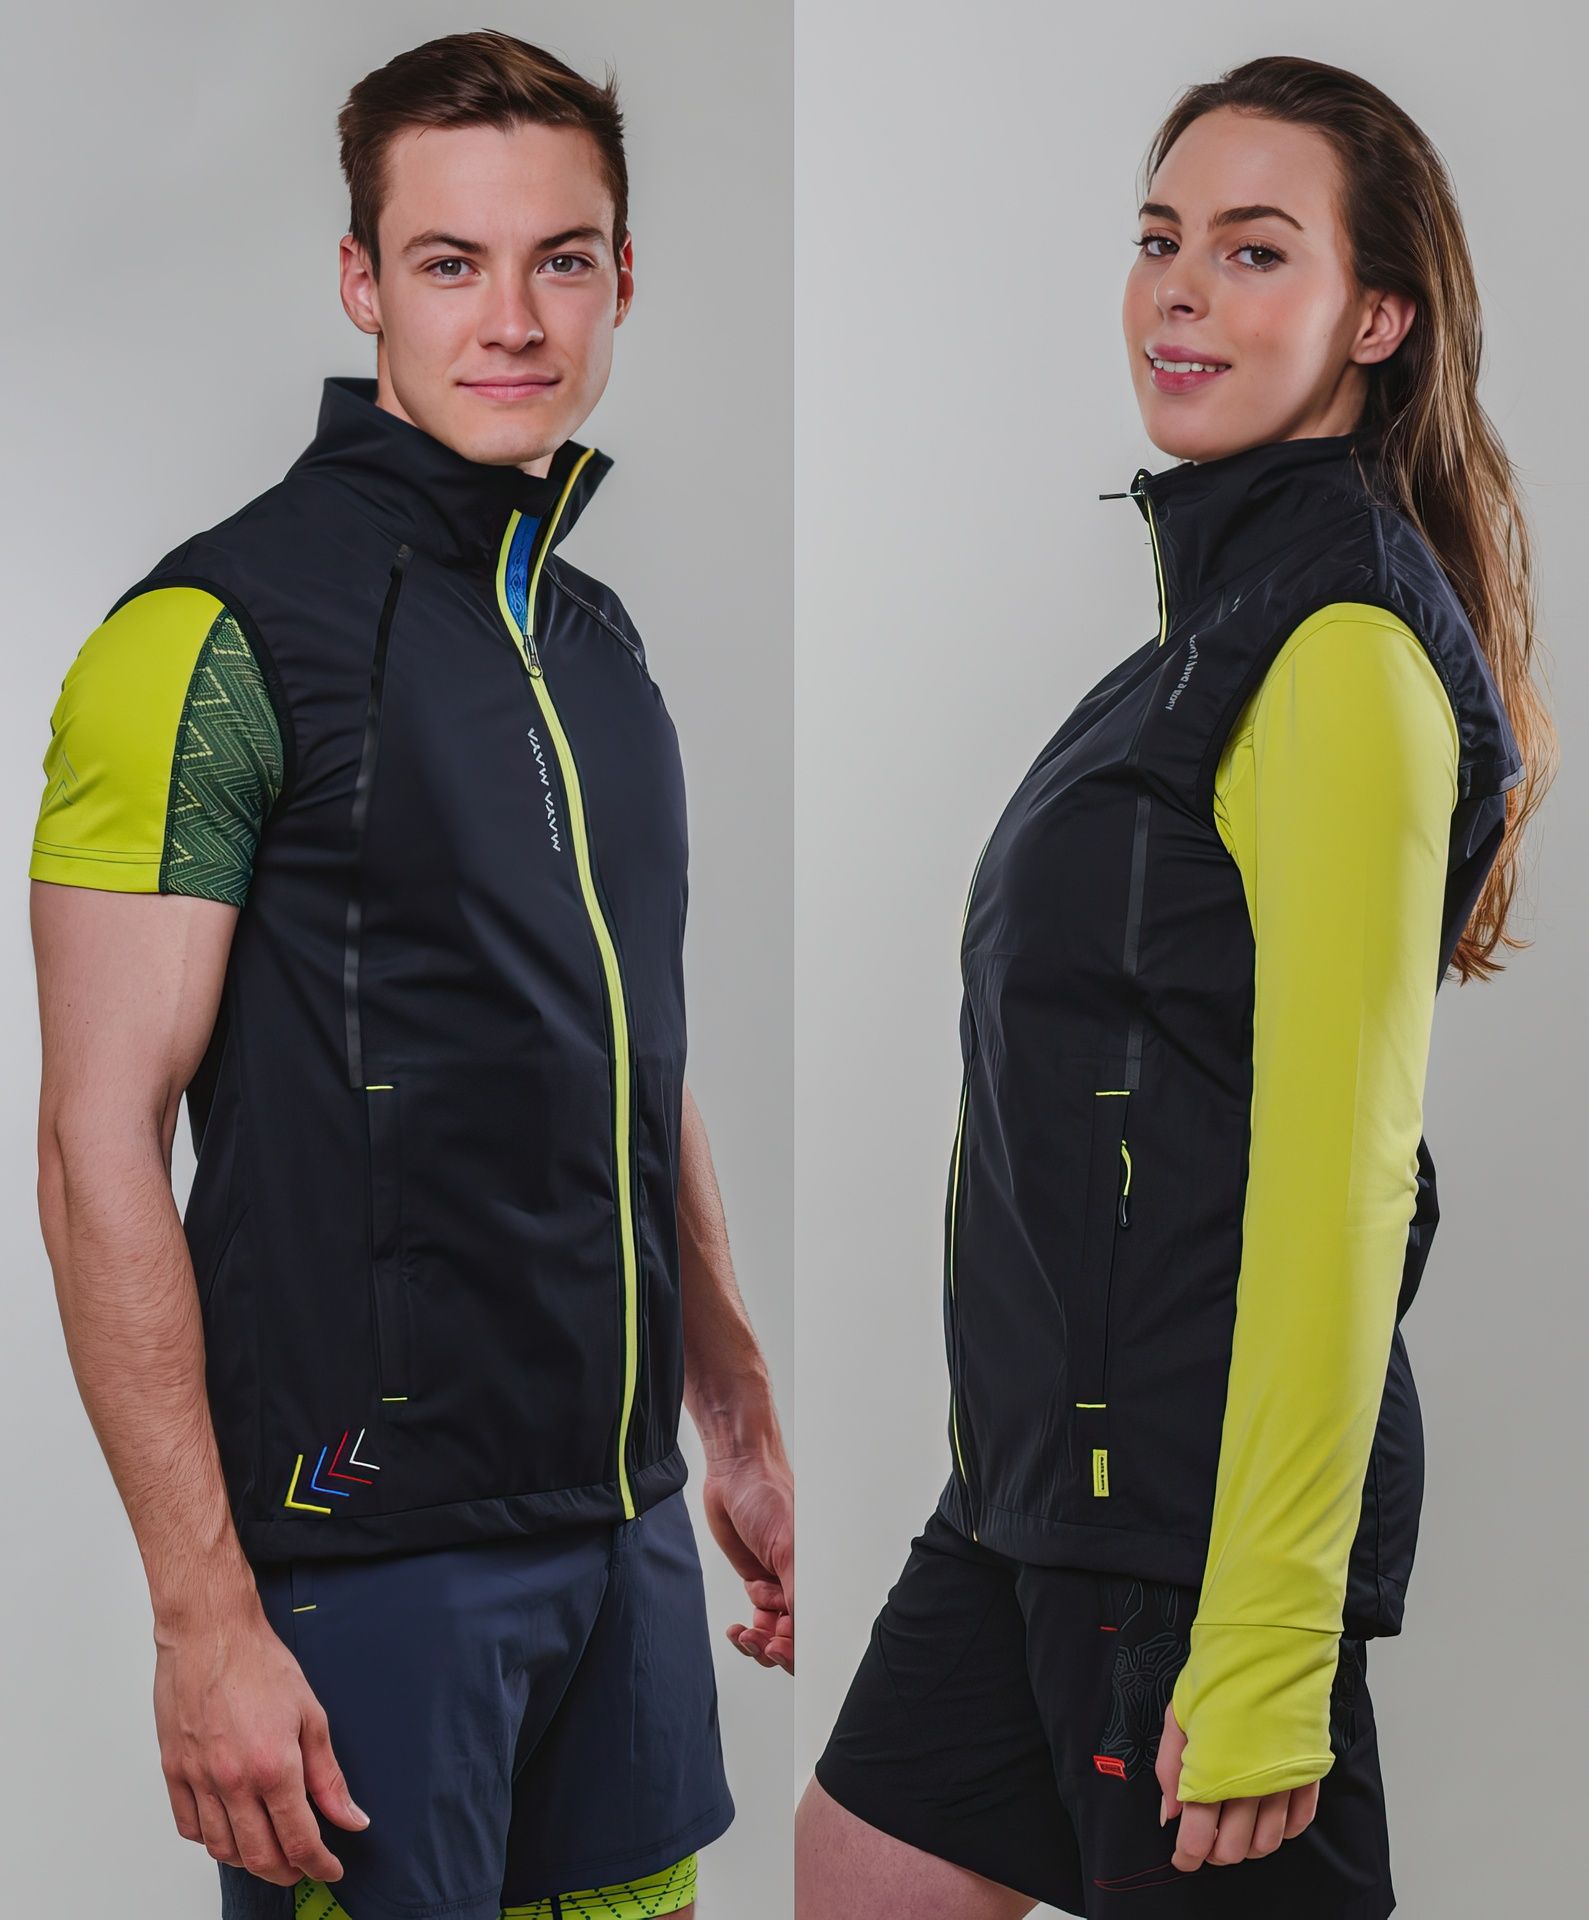 Trail vest black unisex from MAYA MAYA is a breathable hiking and trekking outdoors vest